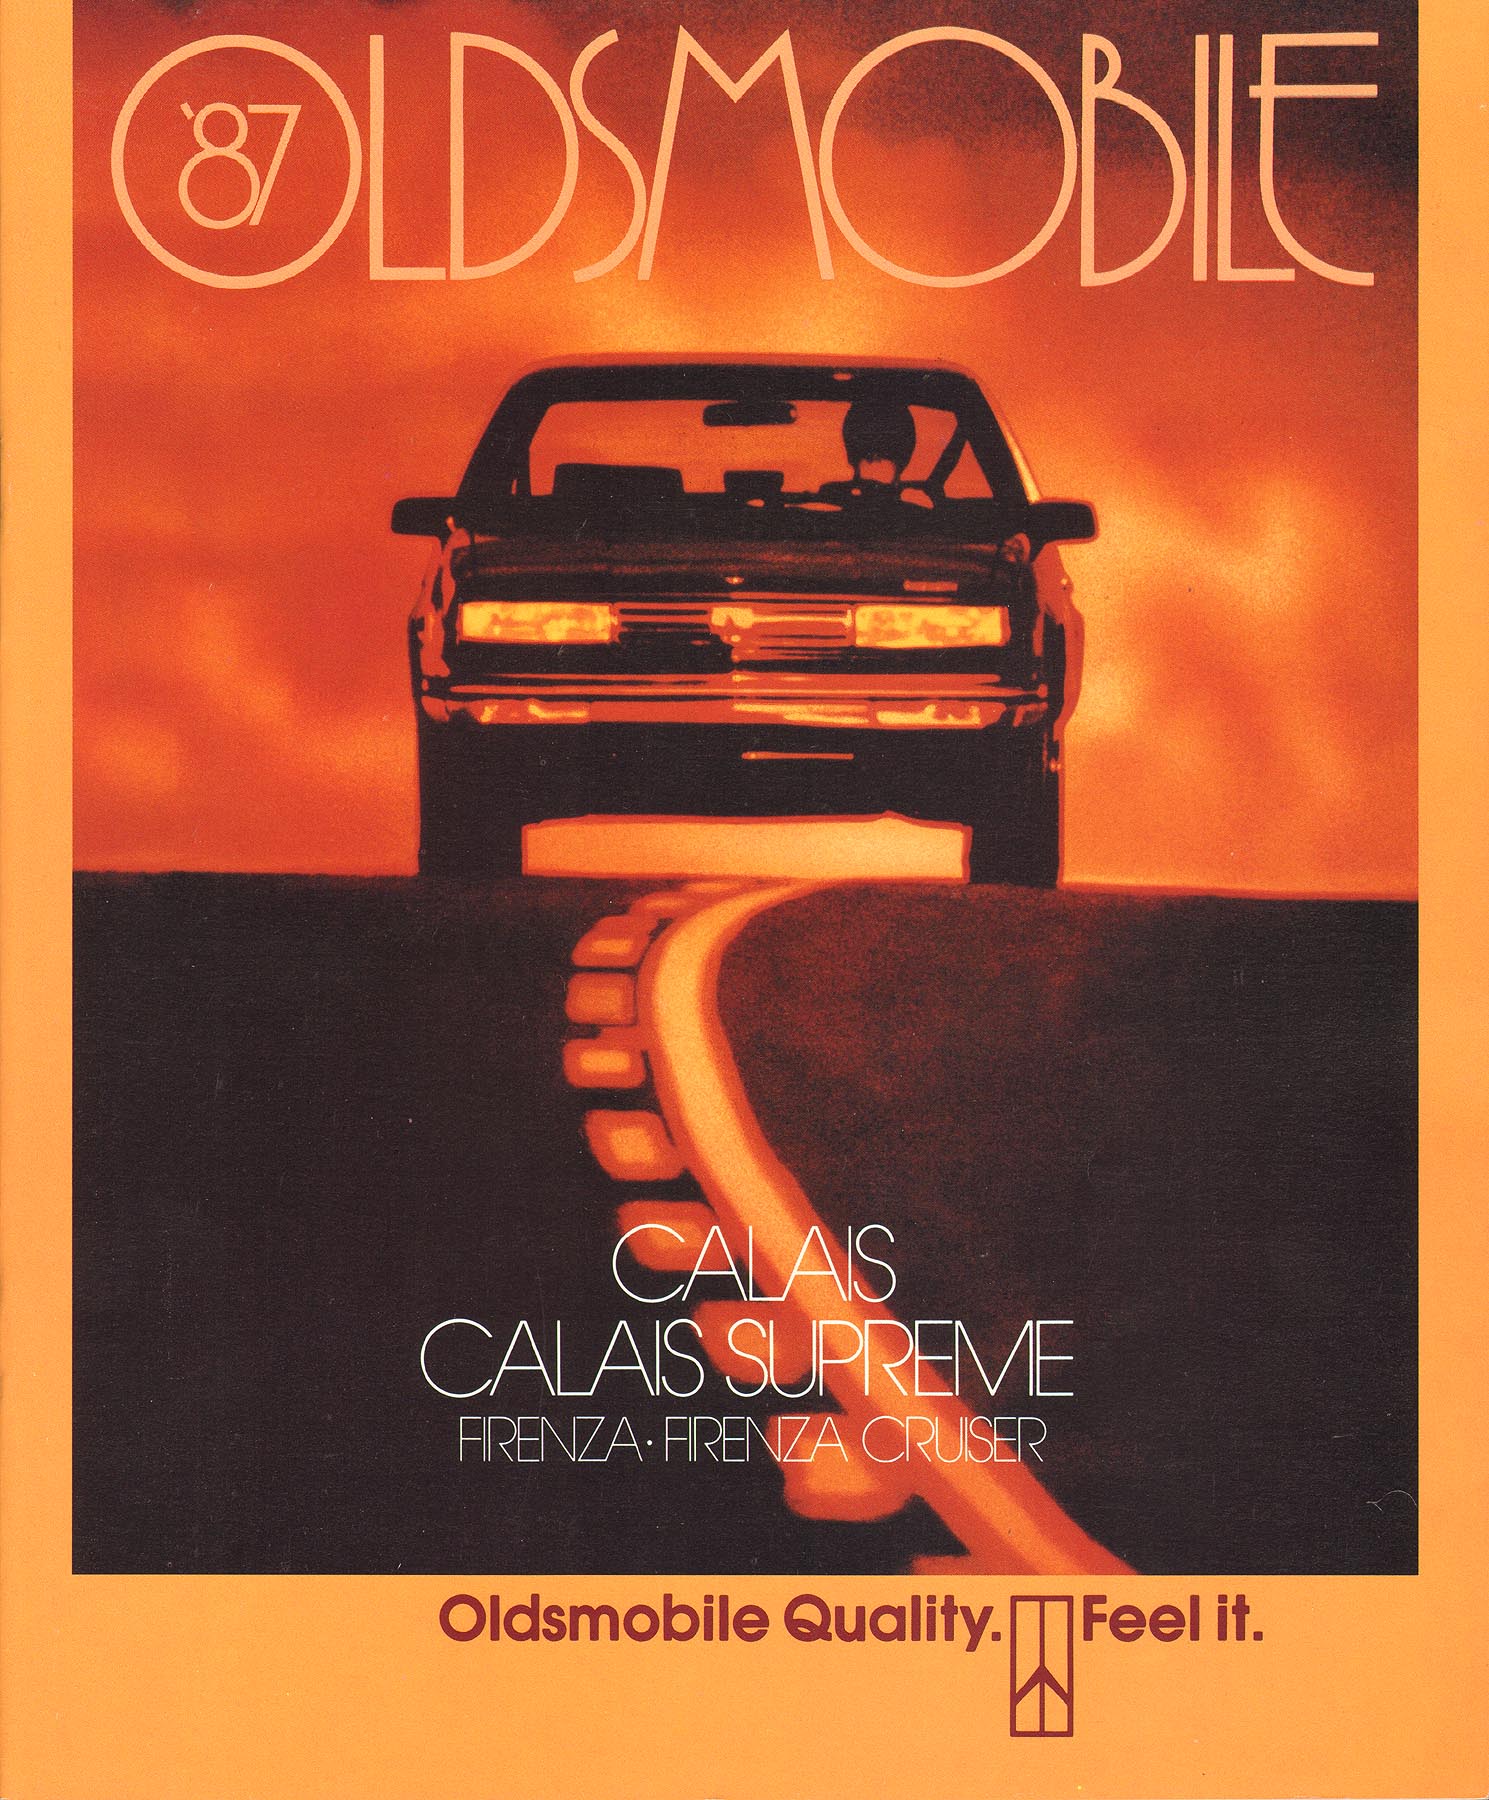 1987 Oldsmobile Small Size-01